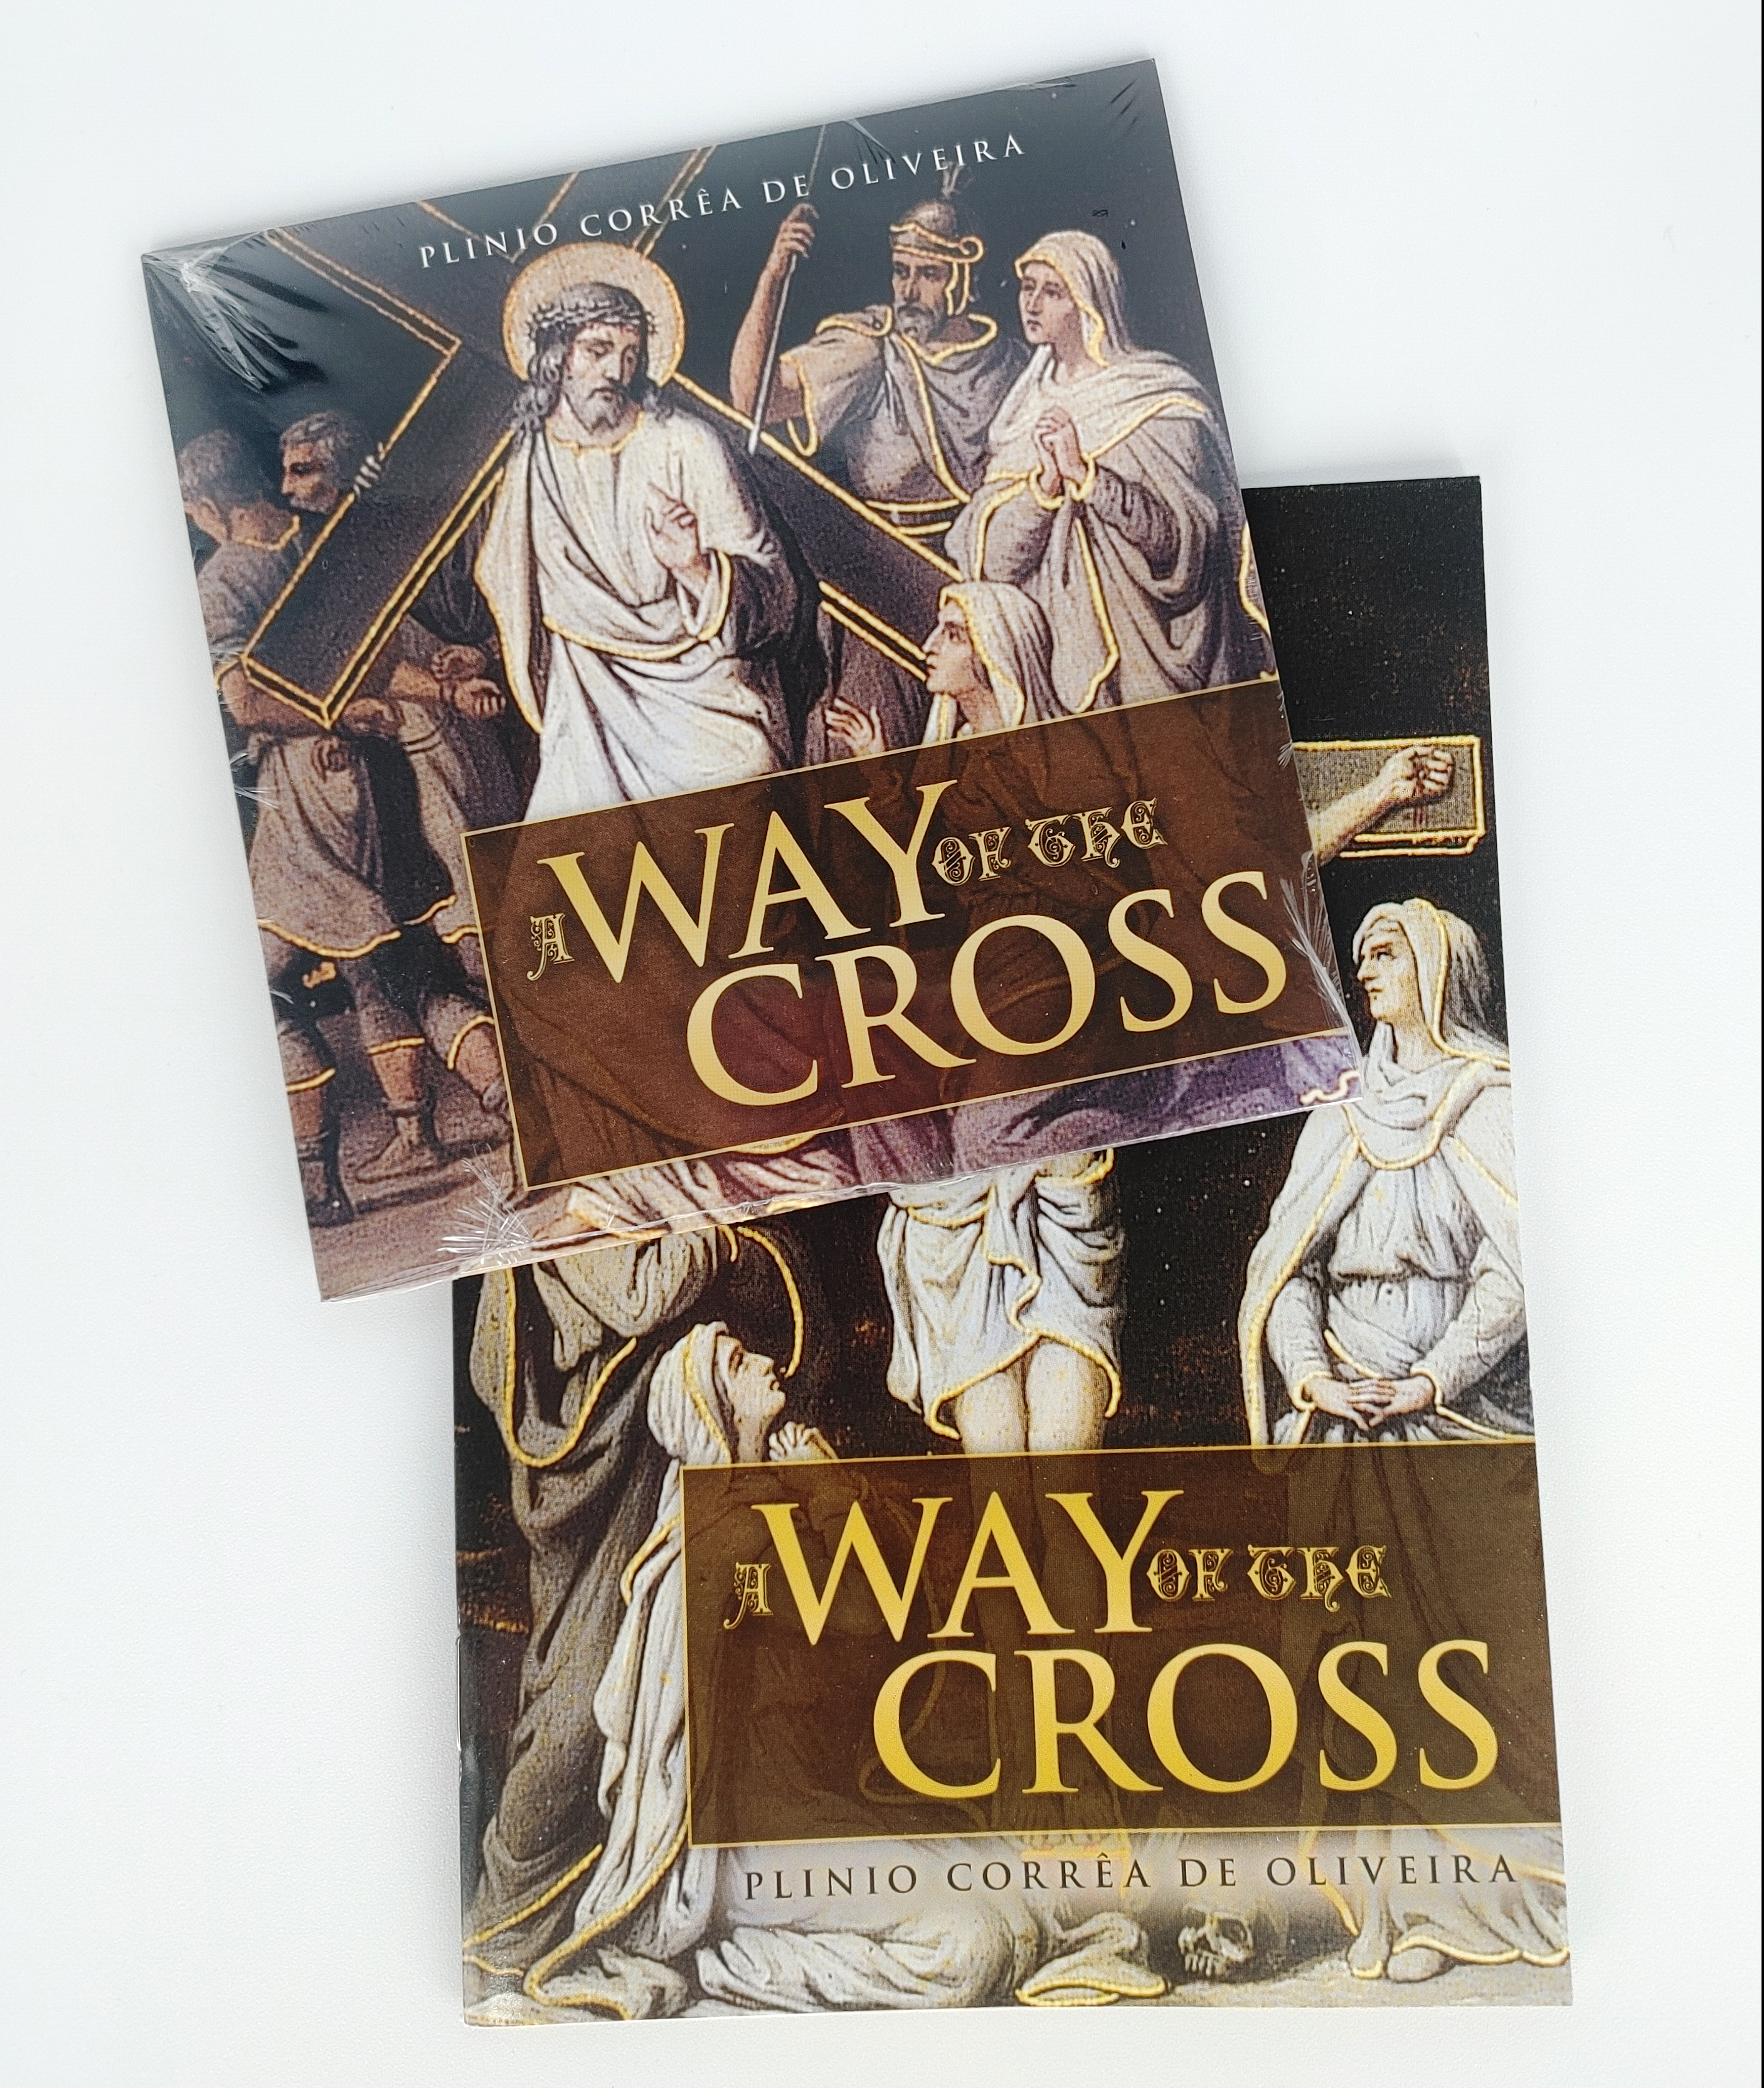 "The Way of the Cross"